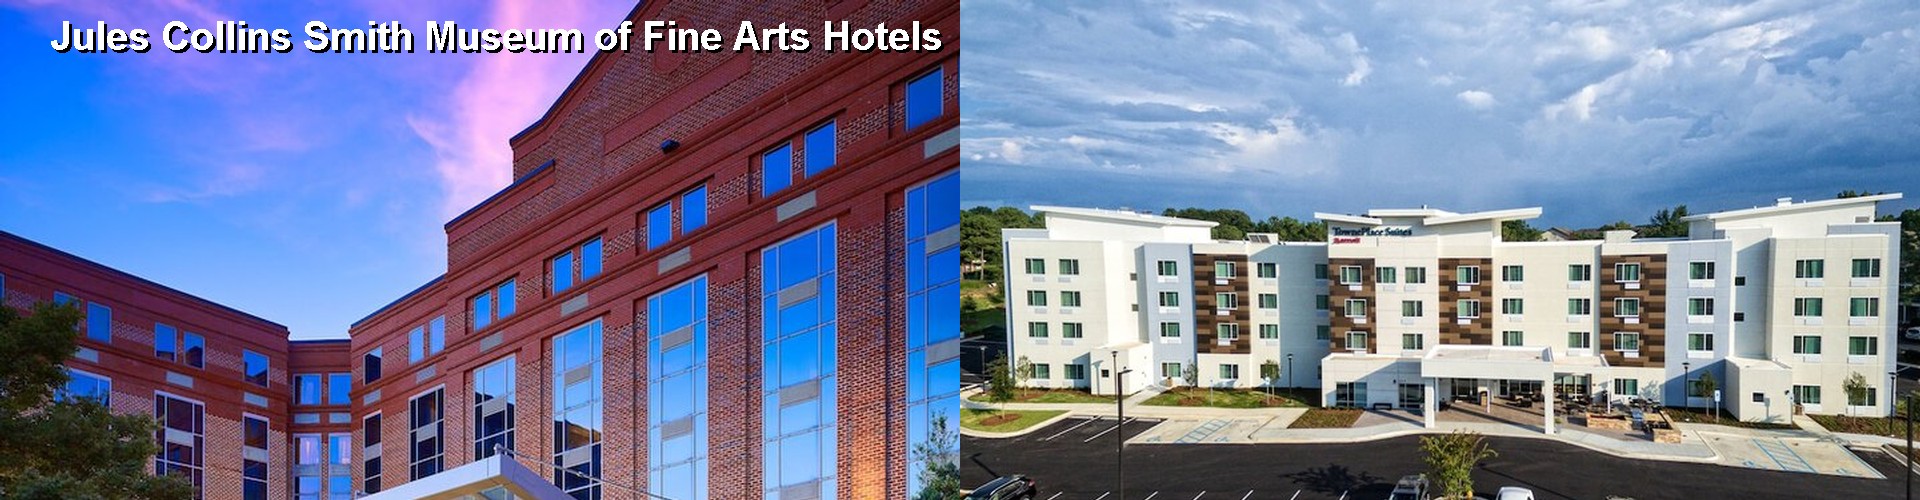 4 Best Hotels near Jules Collins Smith Museum of Fine Arts